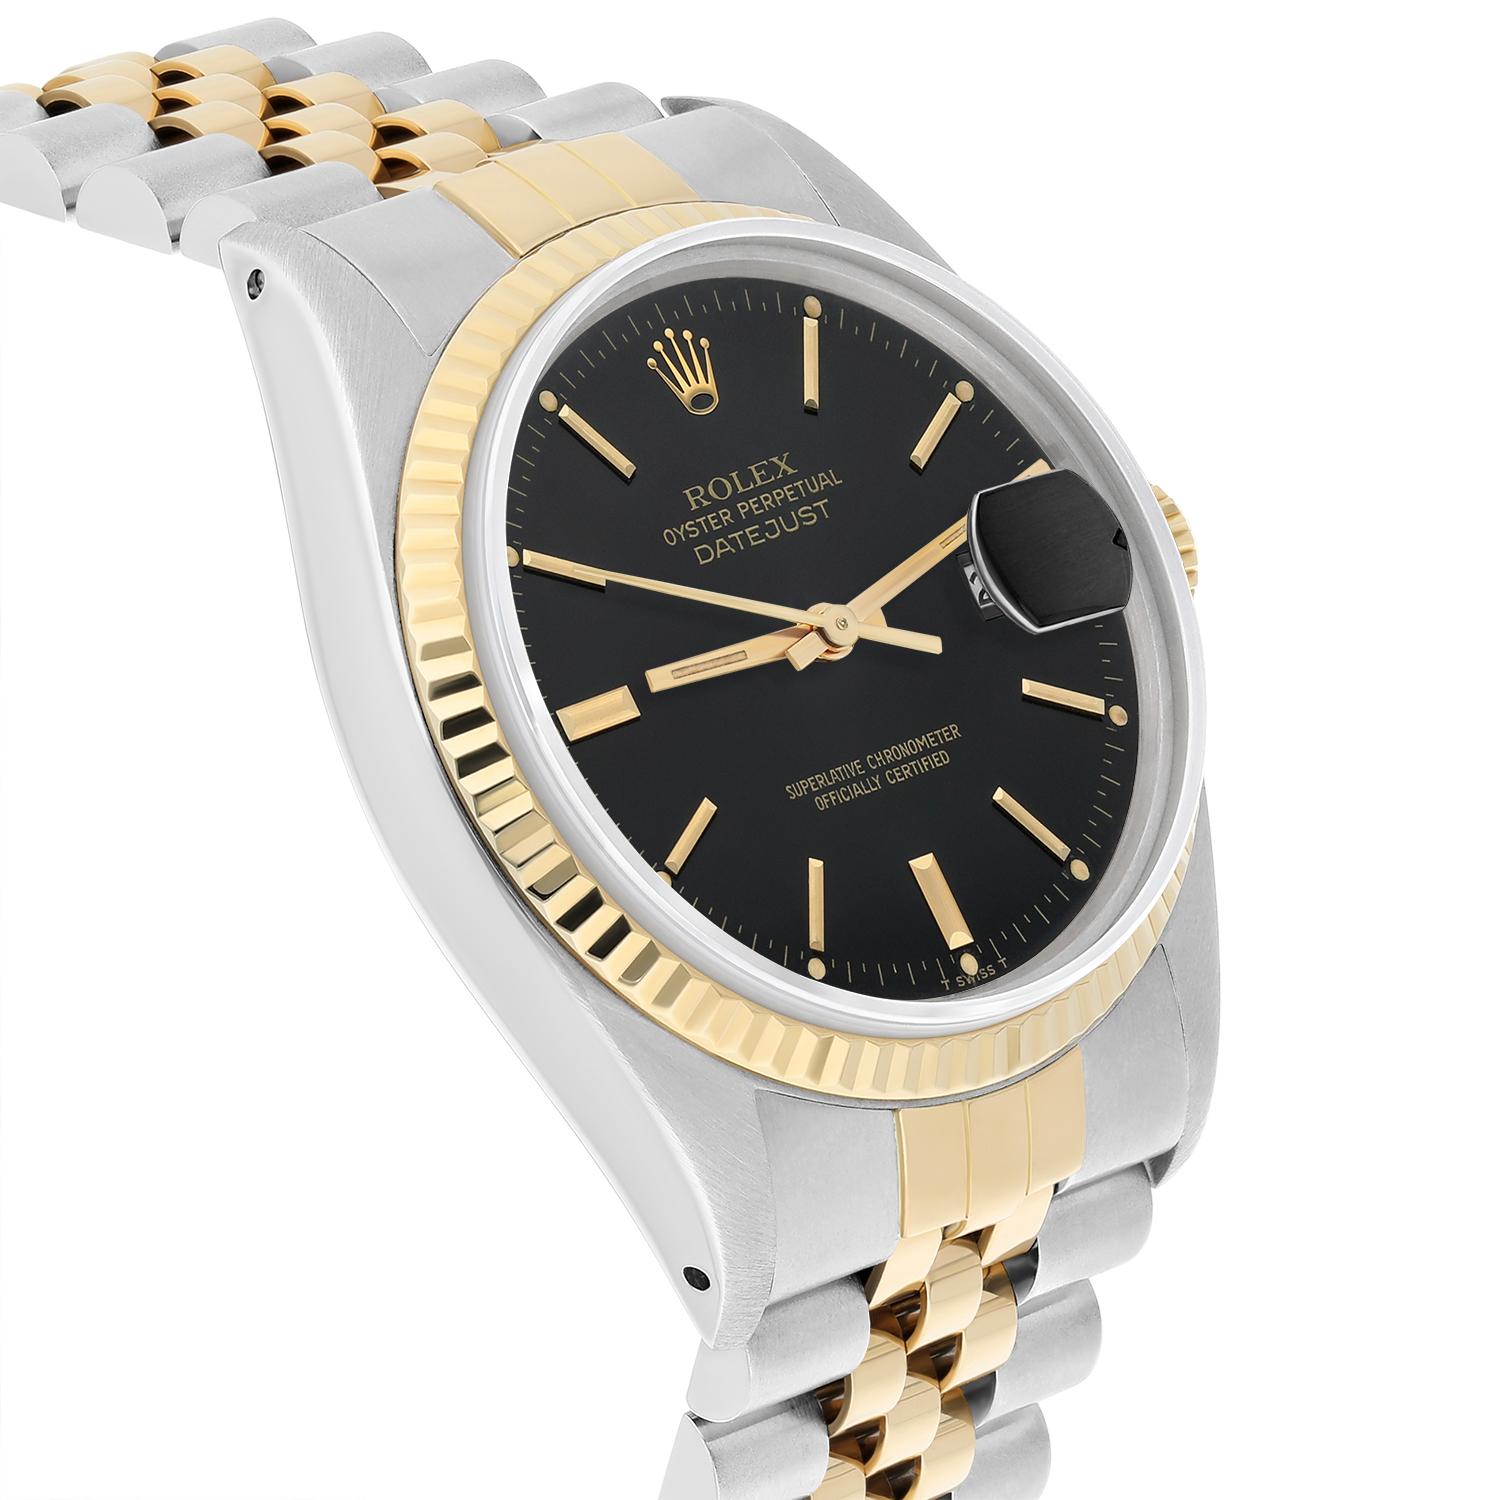 Rolex Datejust 36mm Two Tone Black lndex Dial Jubilee 16013 Circa 1987 Complete In Excellent Condition For Sale In New York, NY